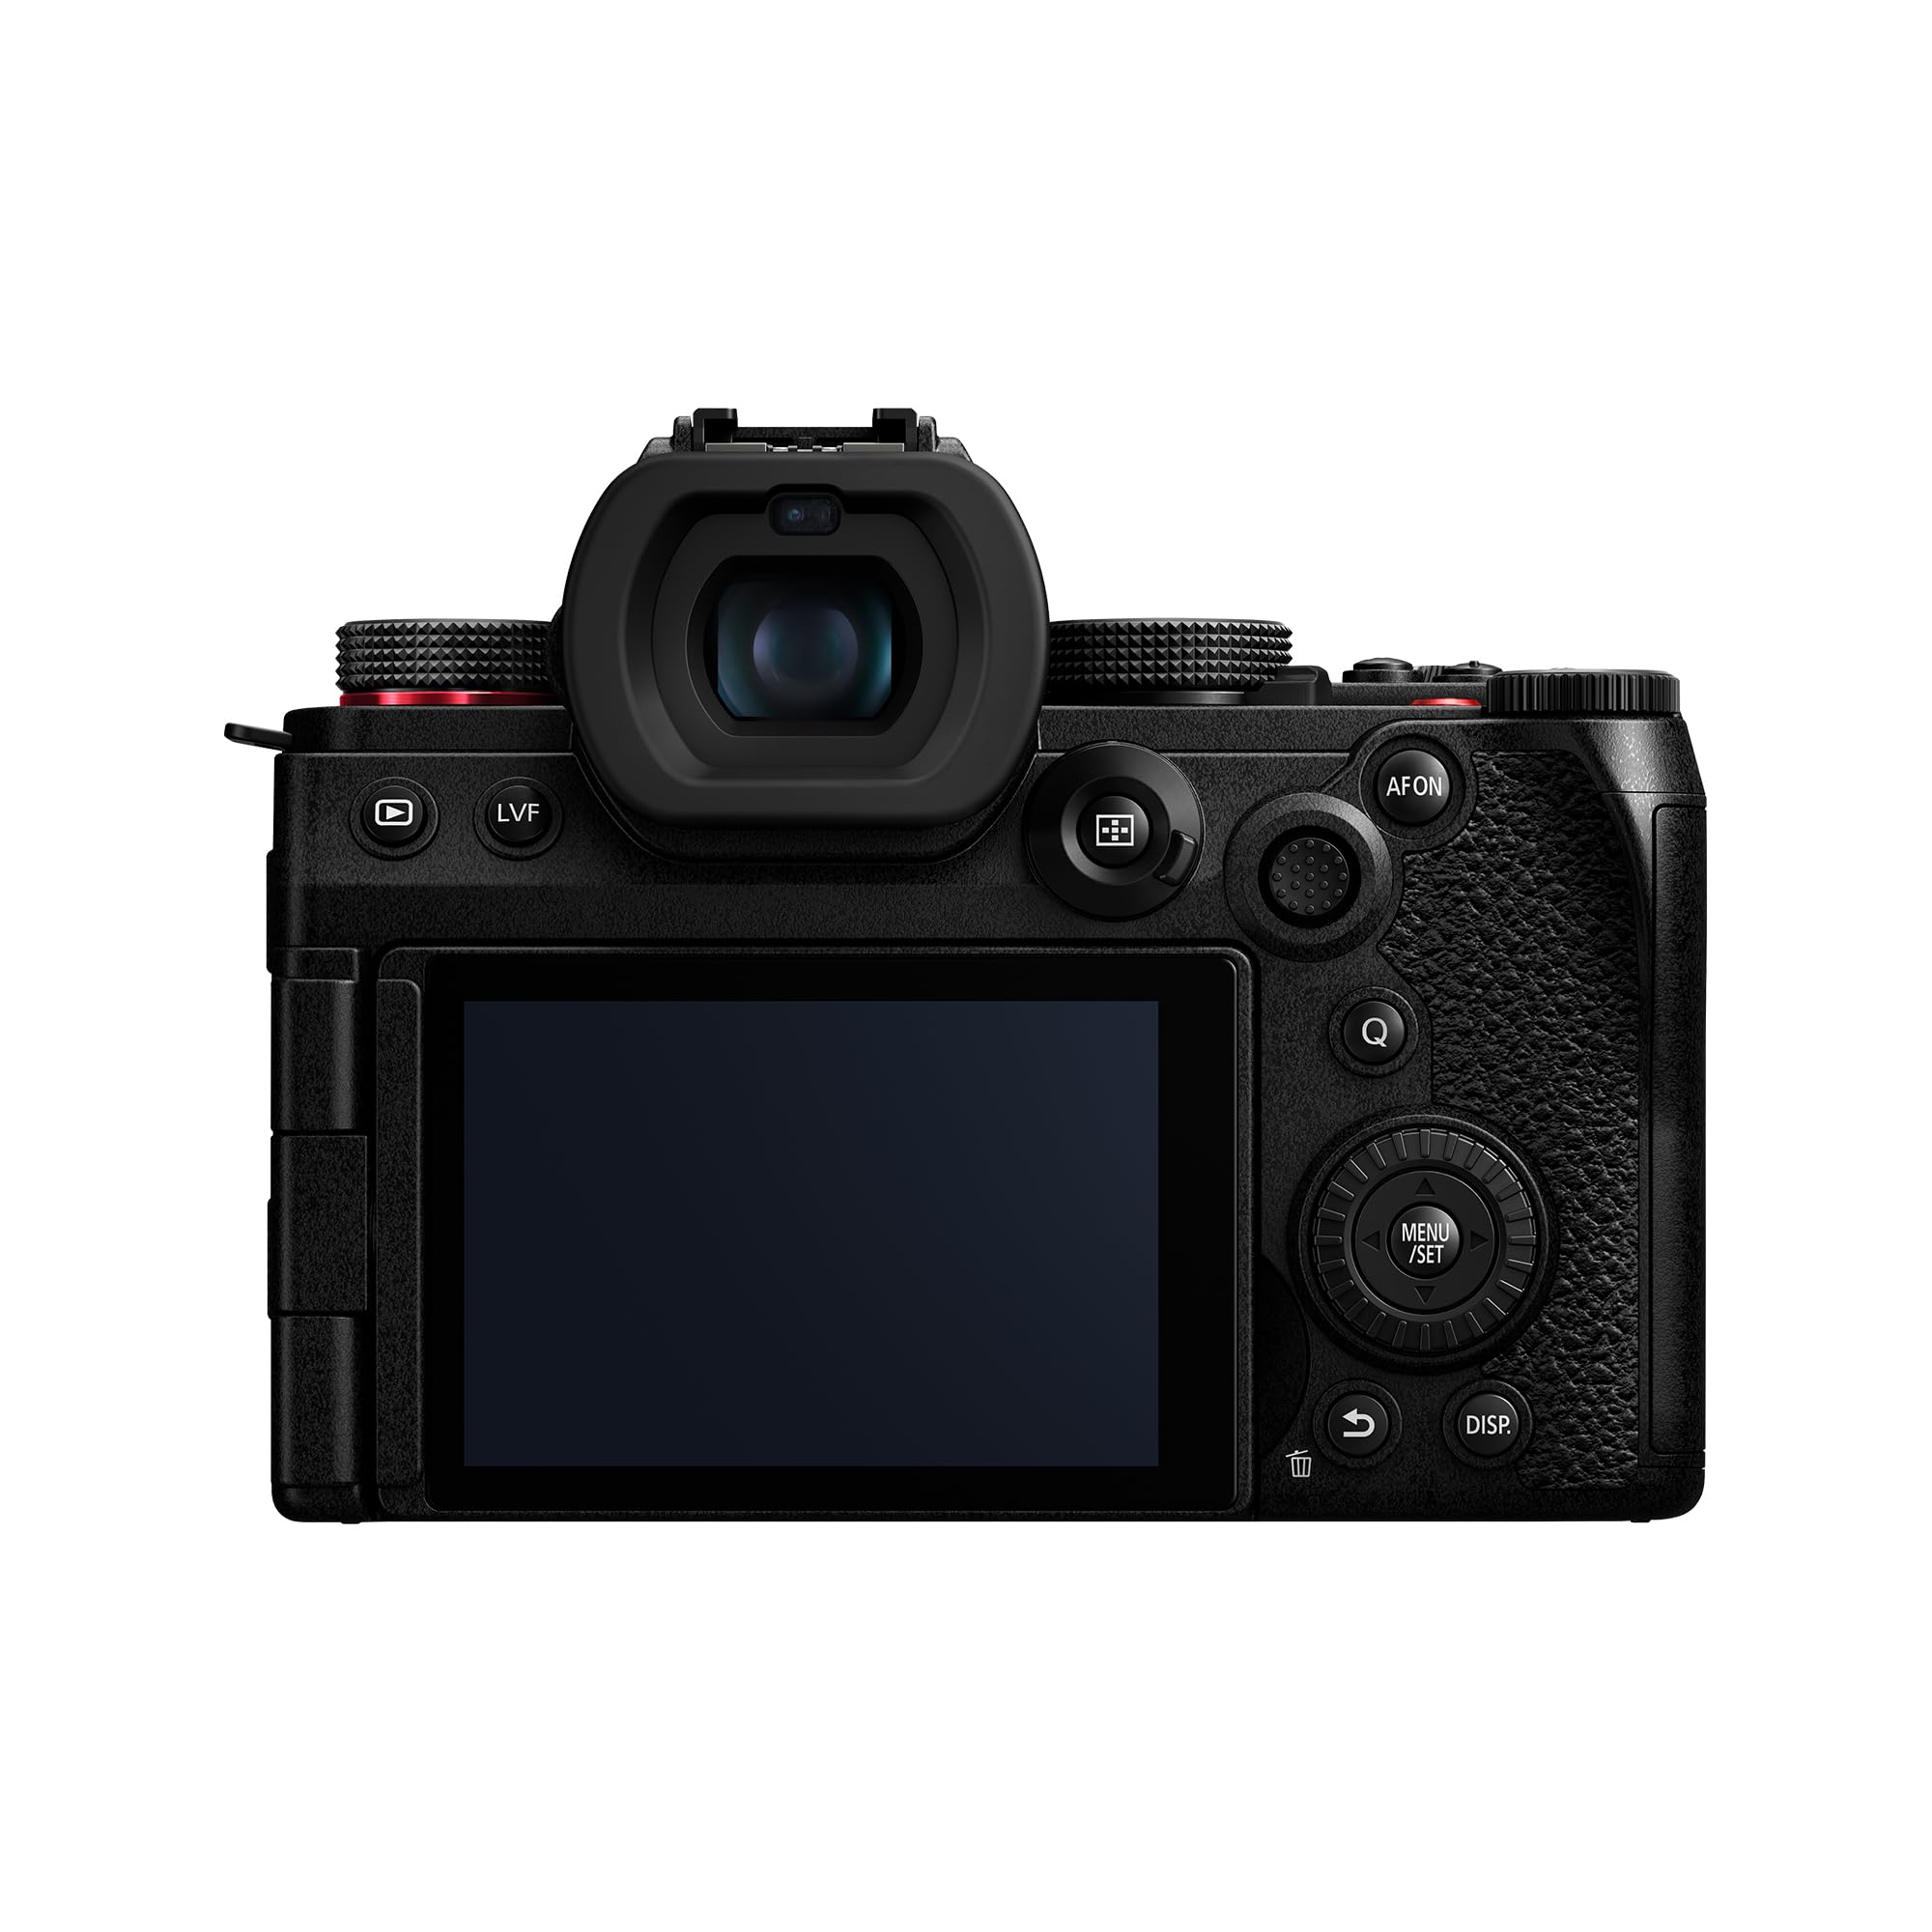 Panasonic LUMIX G9II Micro Four Thirds Camera, 25.2MP Sensor with Phase Hybrid AF, Powerful Image Stabilization, High-Speed Perfomance and Mobility, Flagship Model of G Series - DC-G9M2BODY